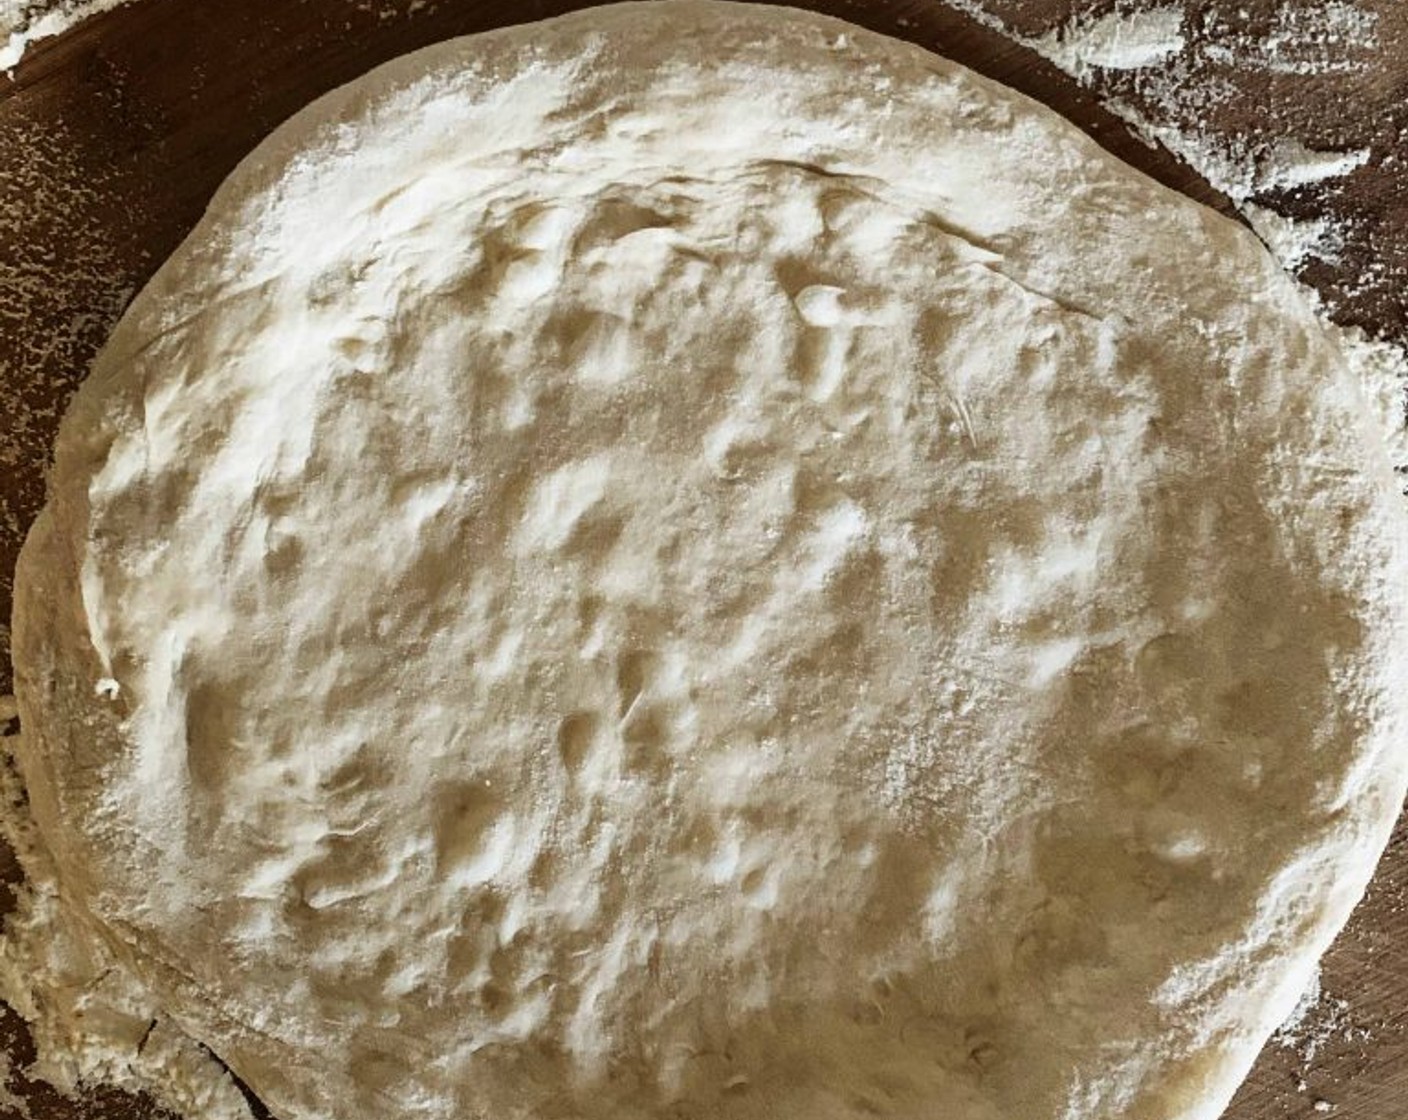 step 9 Turn the dough onto a floured surface and gently shape it into a 12-inch circle. Make soft and gentle movements going from the center toward the edge, trying to push the air bubbles inside the dough towards the edges, this will give you those typical holes which we all love in pizza.